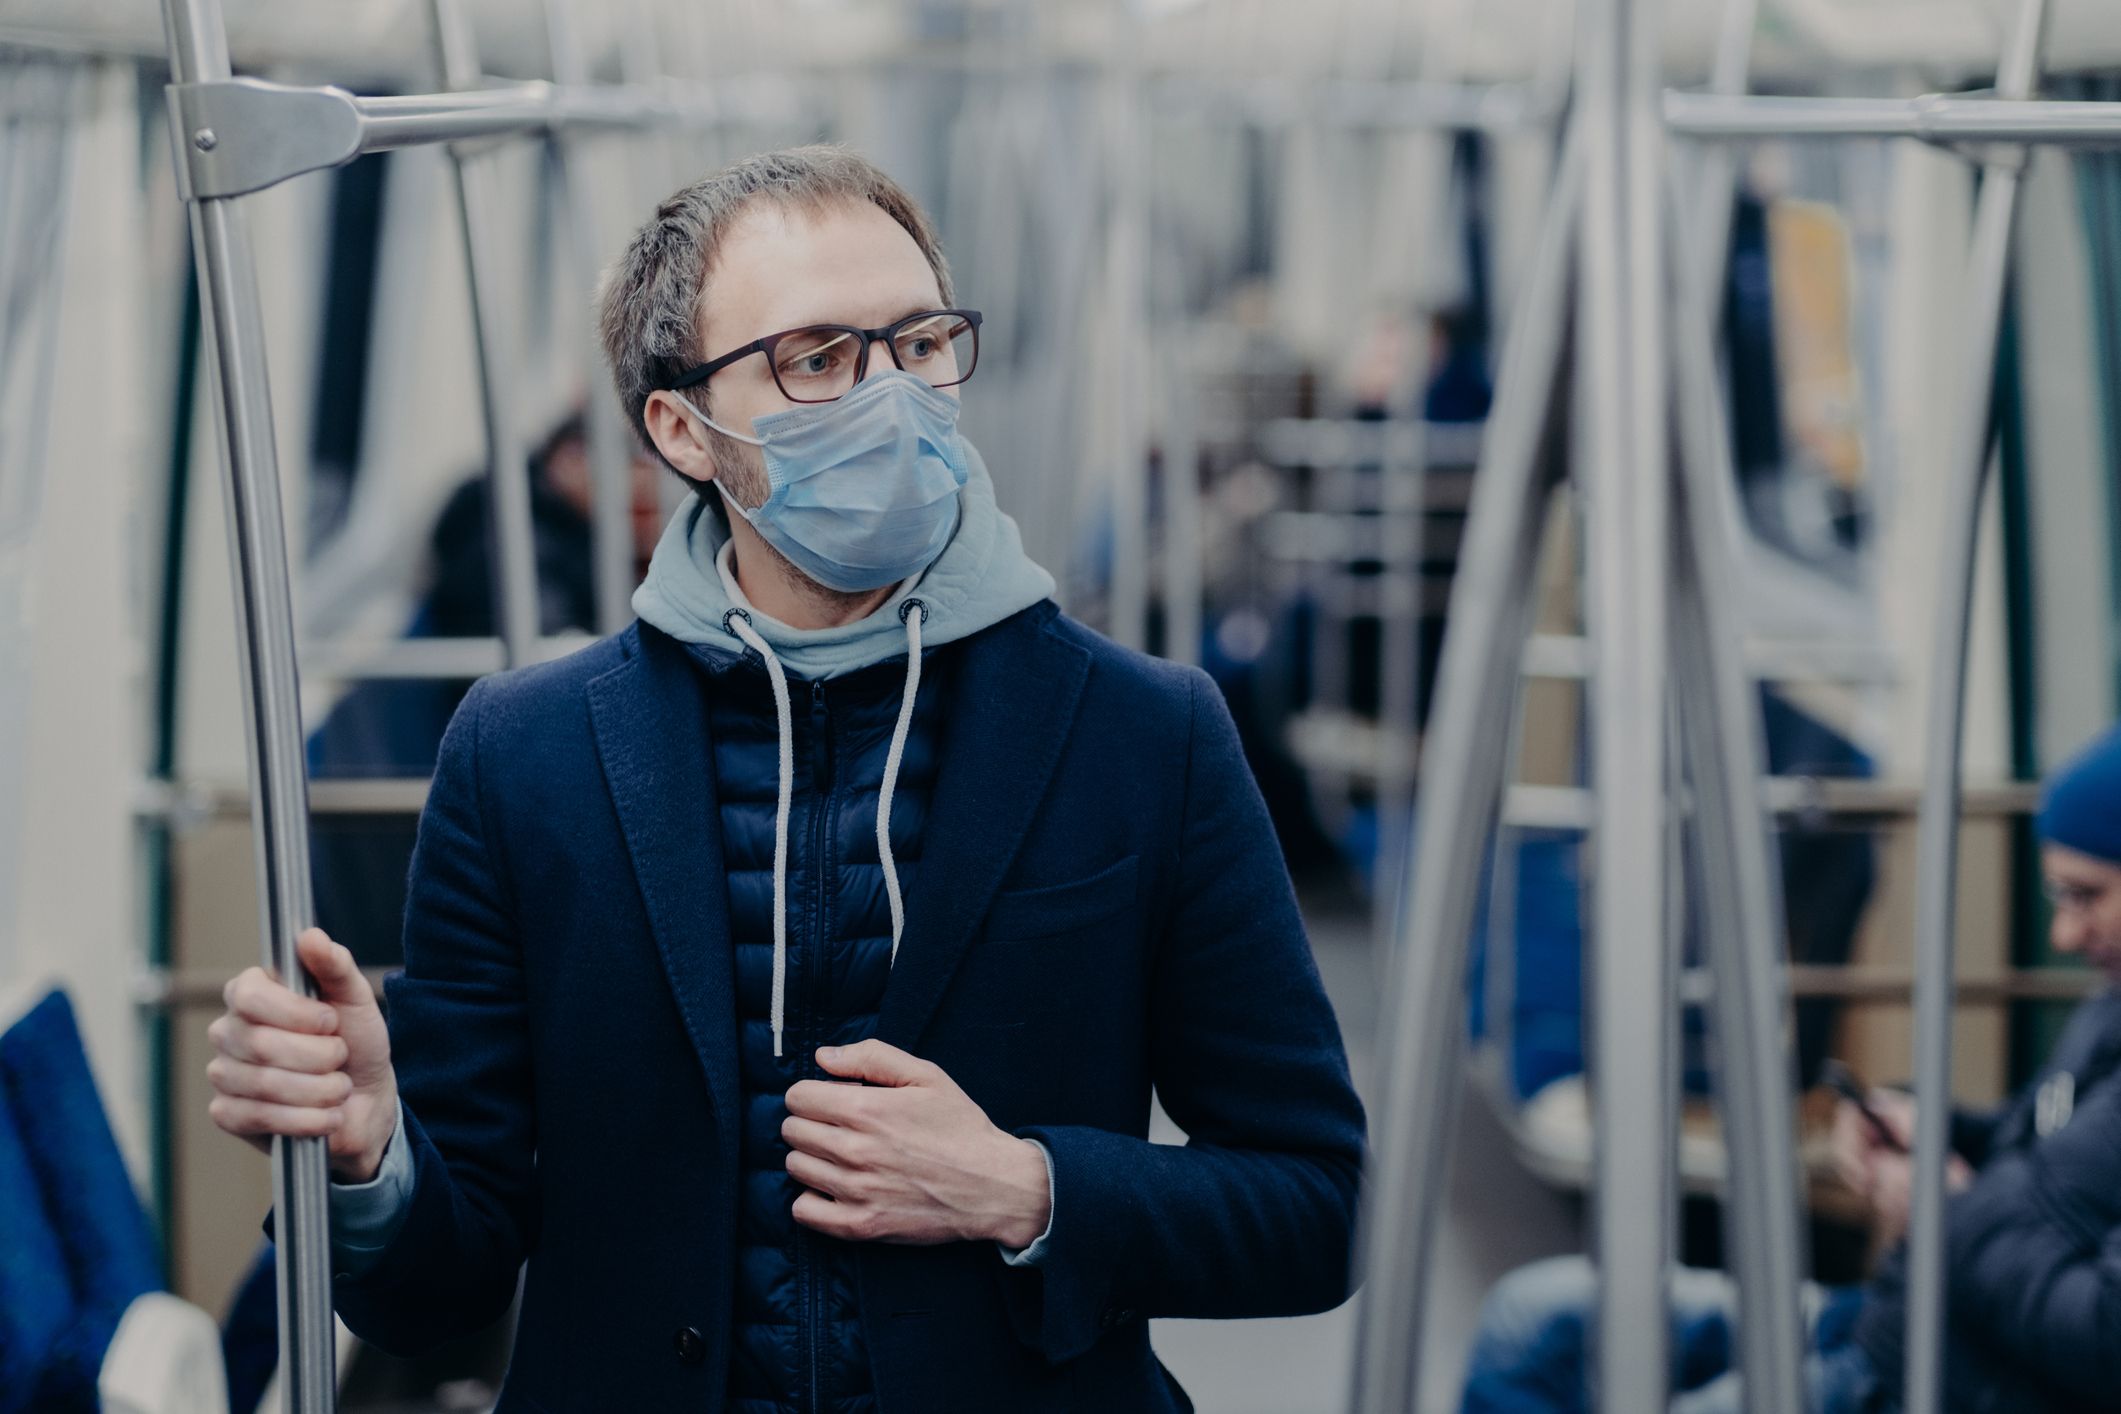 Now is not the time to neglect public health precaution: A new study finds universal mask-wearing could save 130,000 American lives.